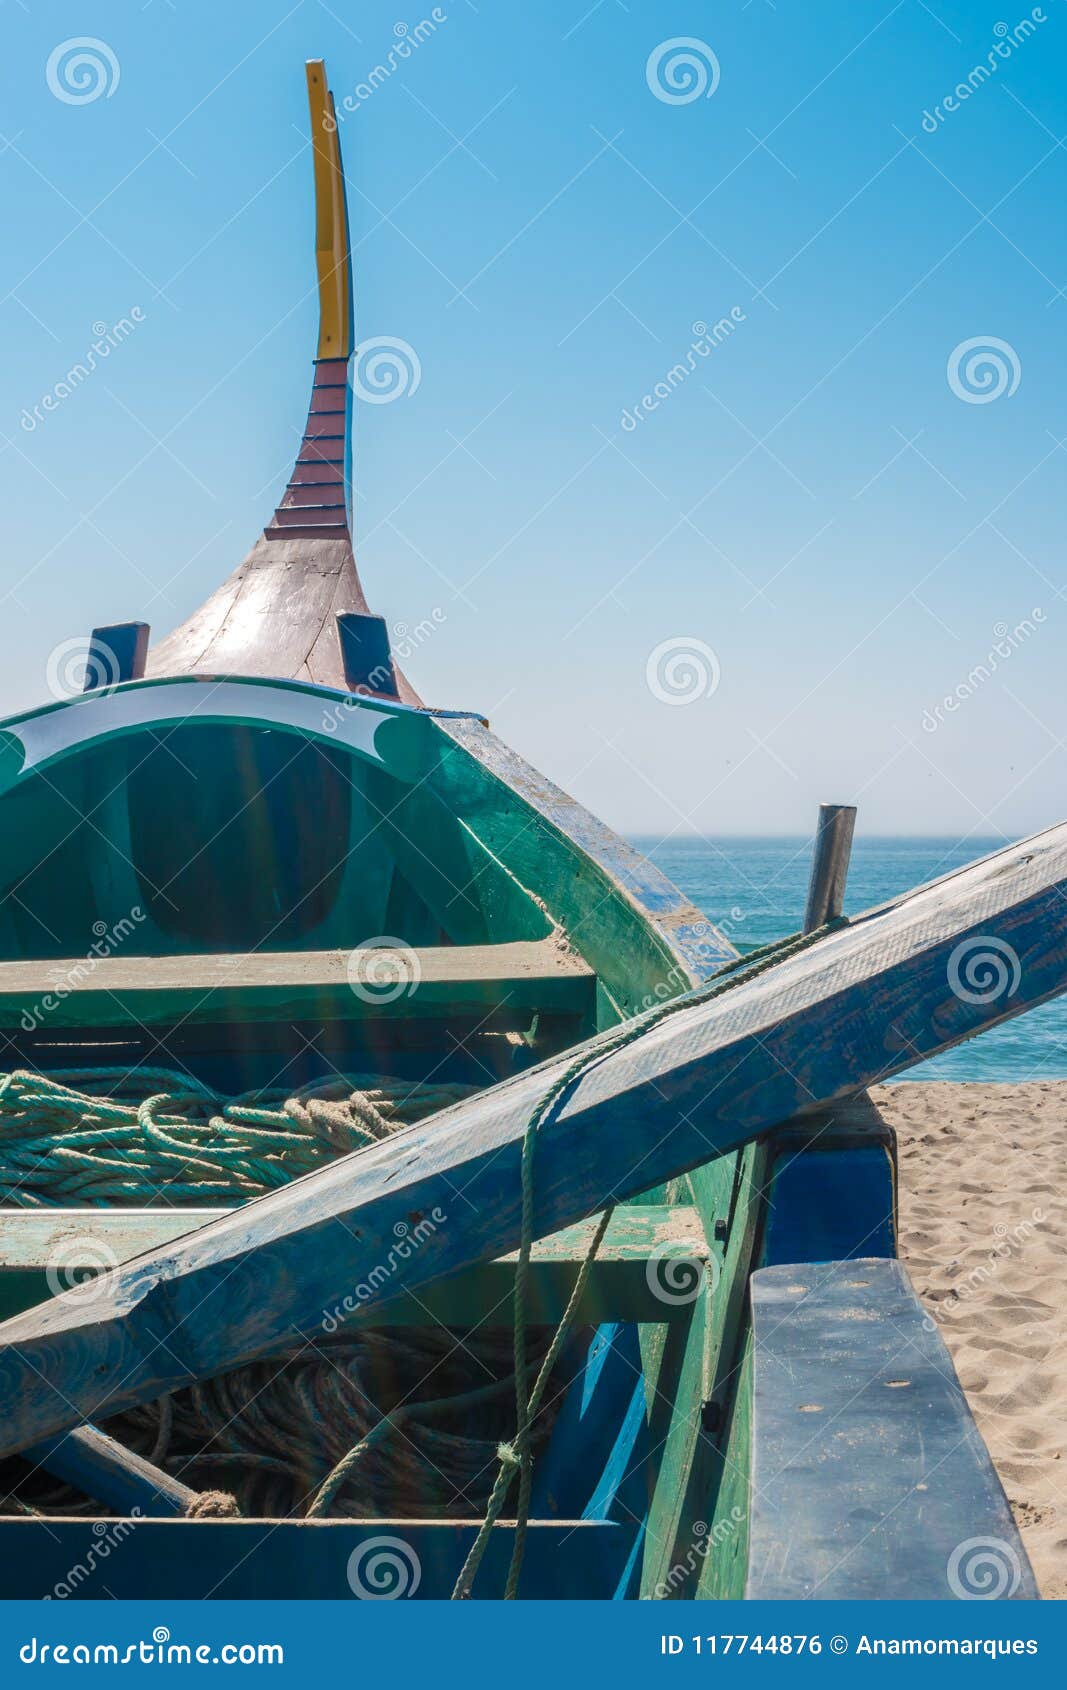 arte xavega typical portuguese old fishing boat on the beach in